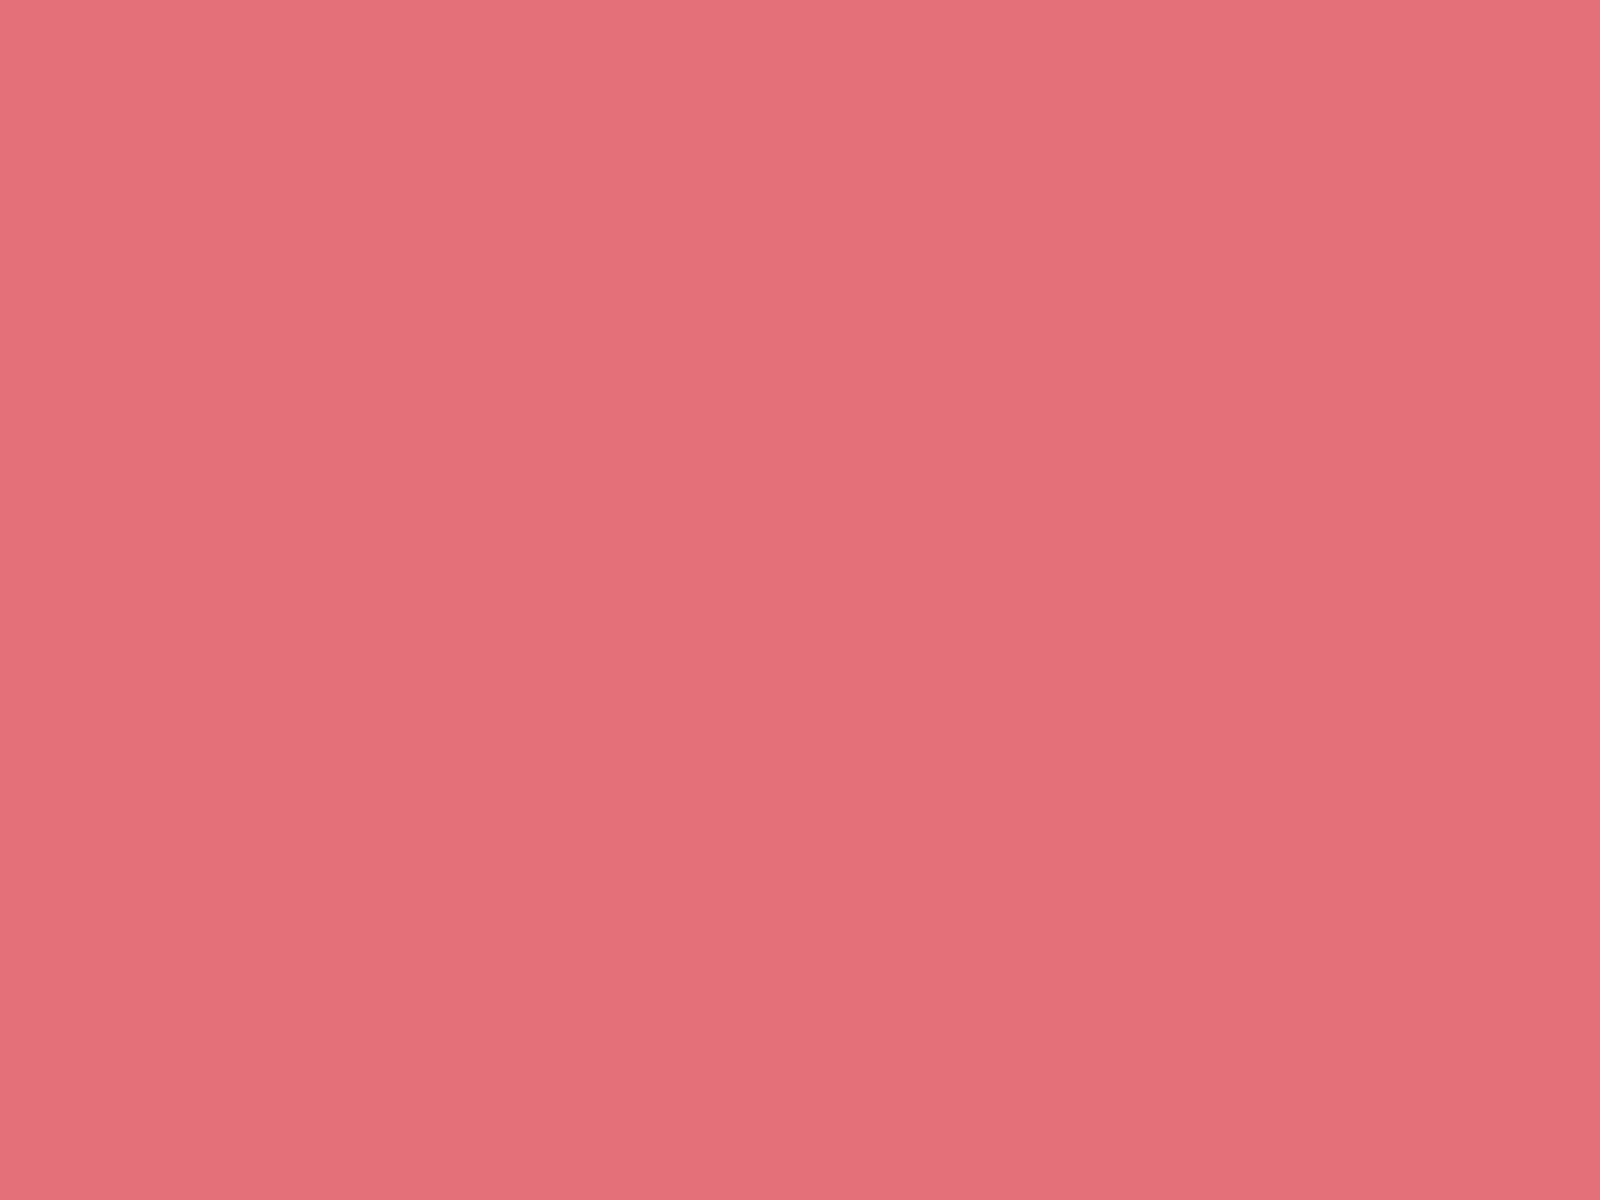 1600x1200 Tango Pink Solid Color Background